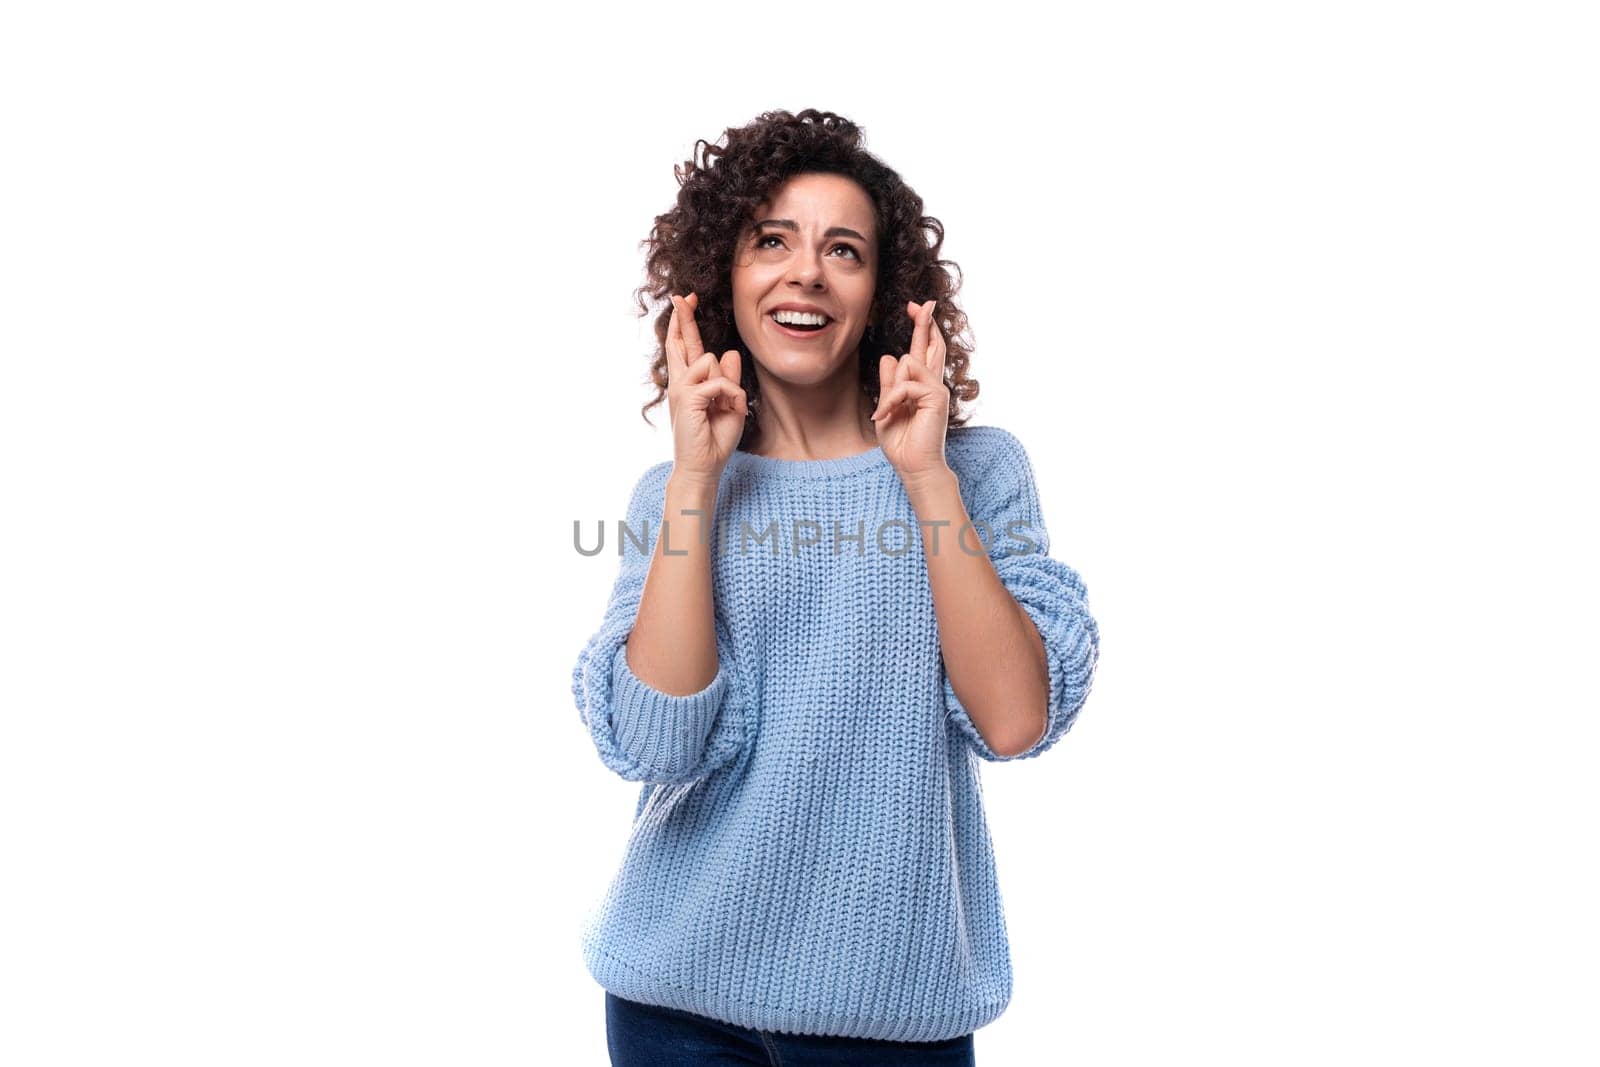 a young pretty lady with black curly hair dressed in a light blue sweater crossed her fingers in anticipation.